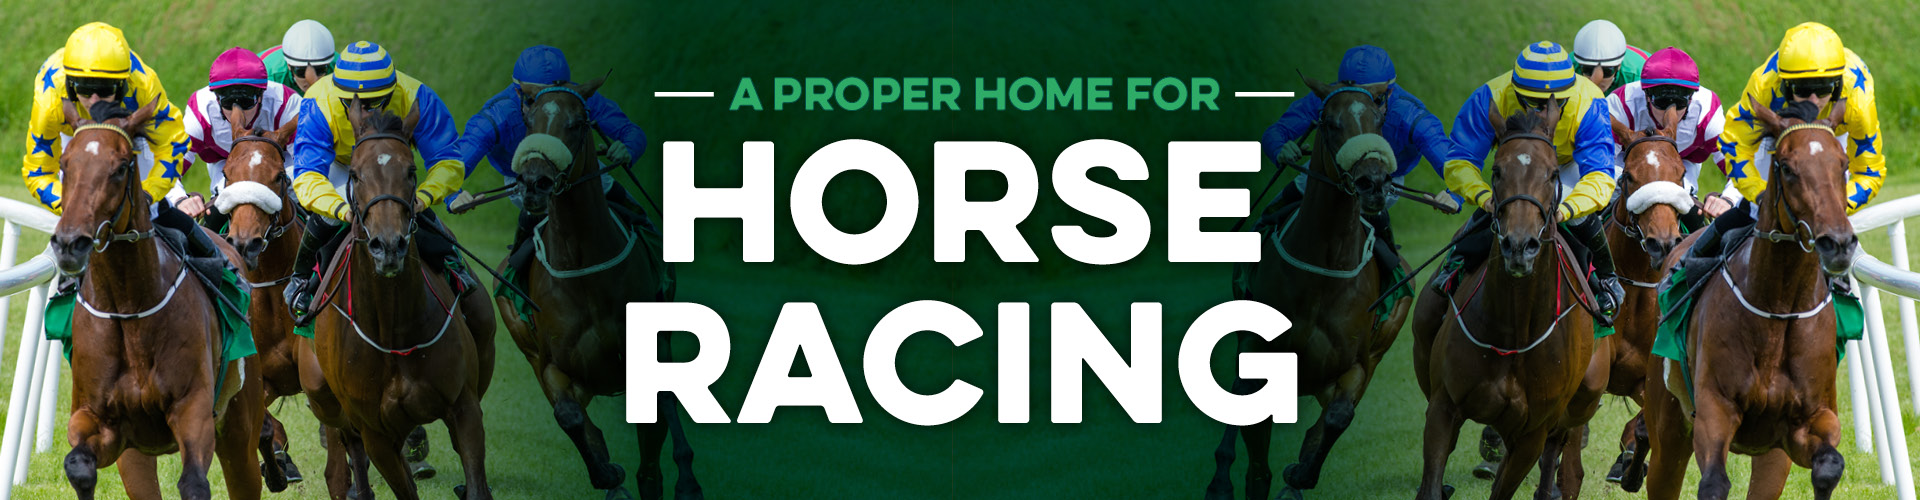 Watch horse racing live at Oxnoble pub